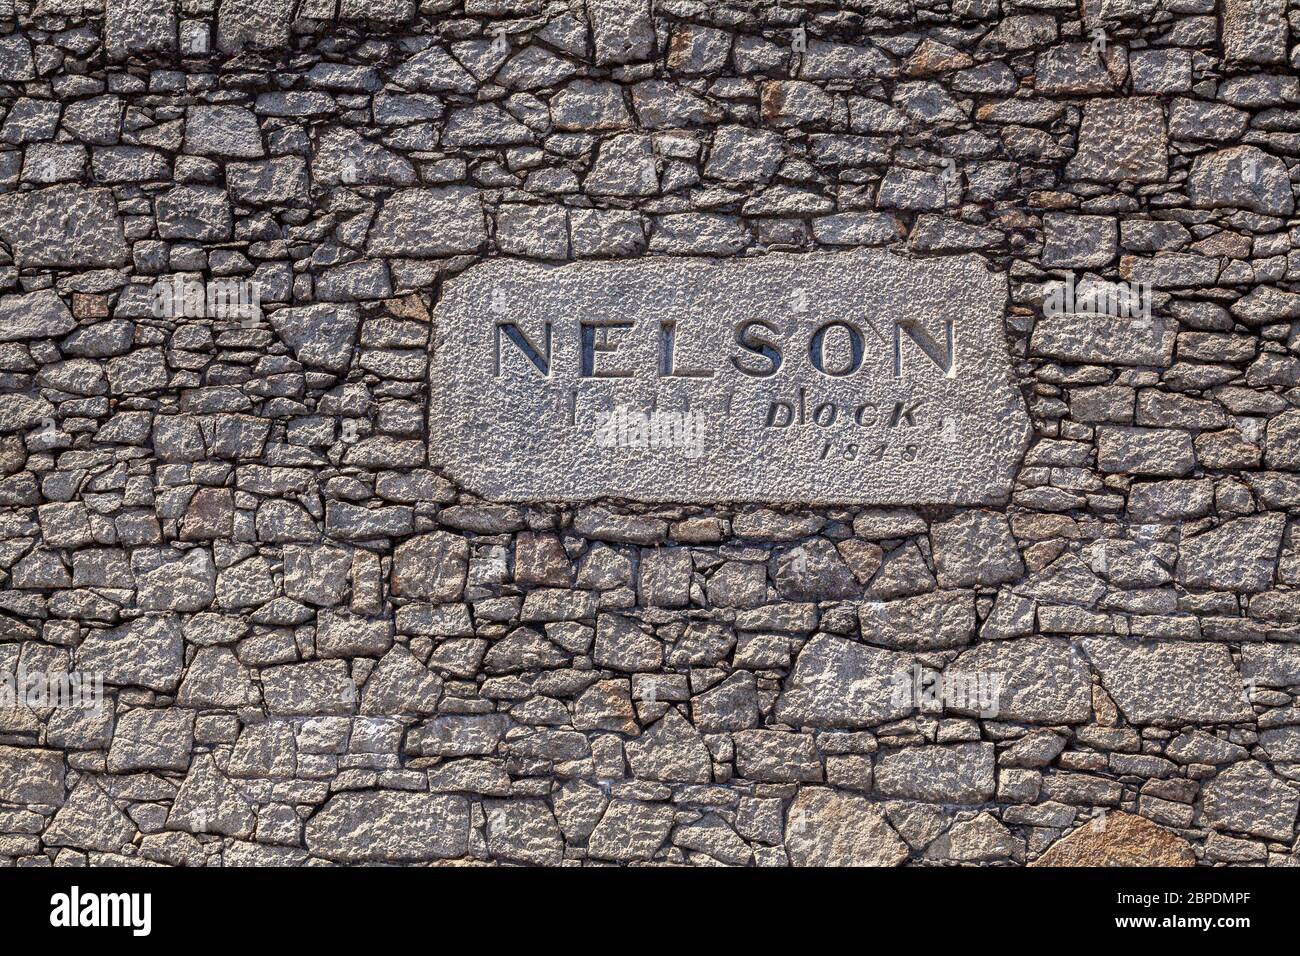 Sign on the old stone wall of the Nelson Dock, part of the Port of Liverpool, England Stock Photo